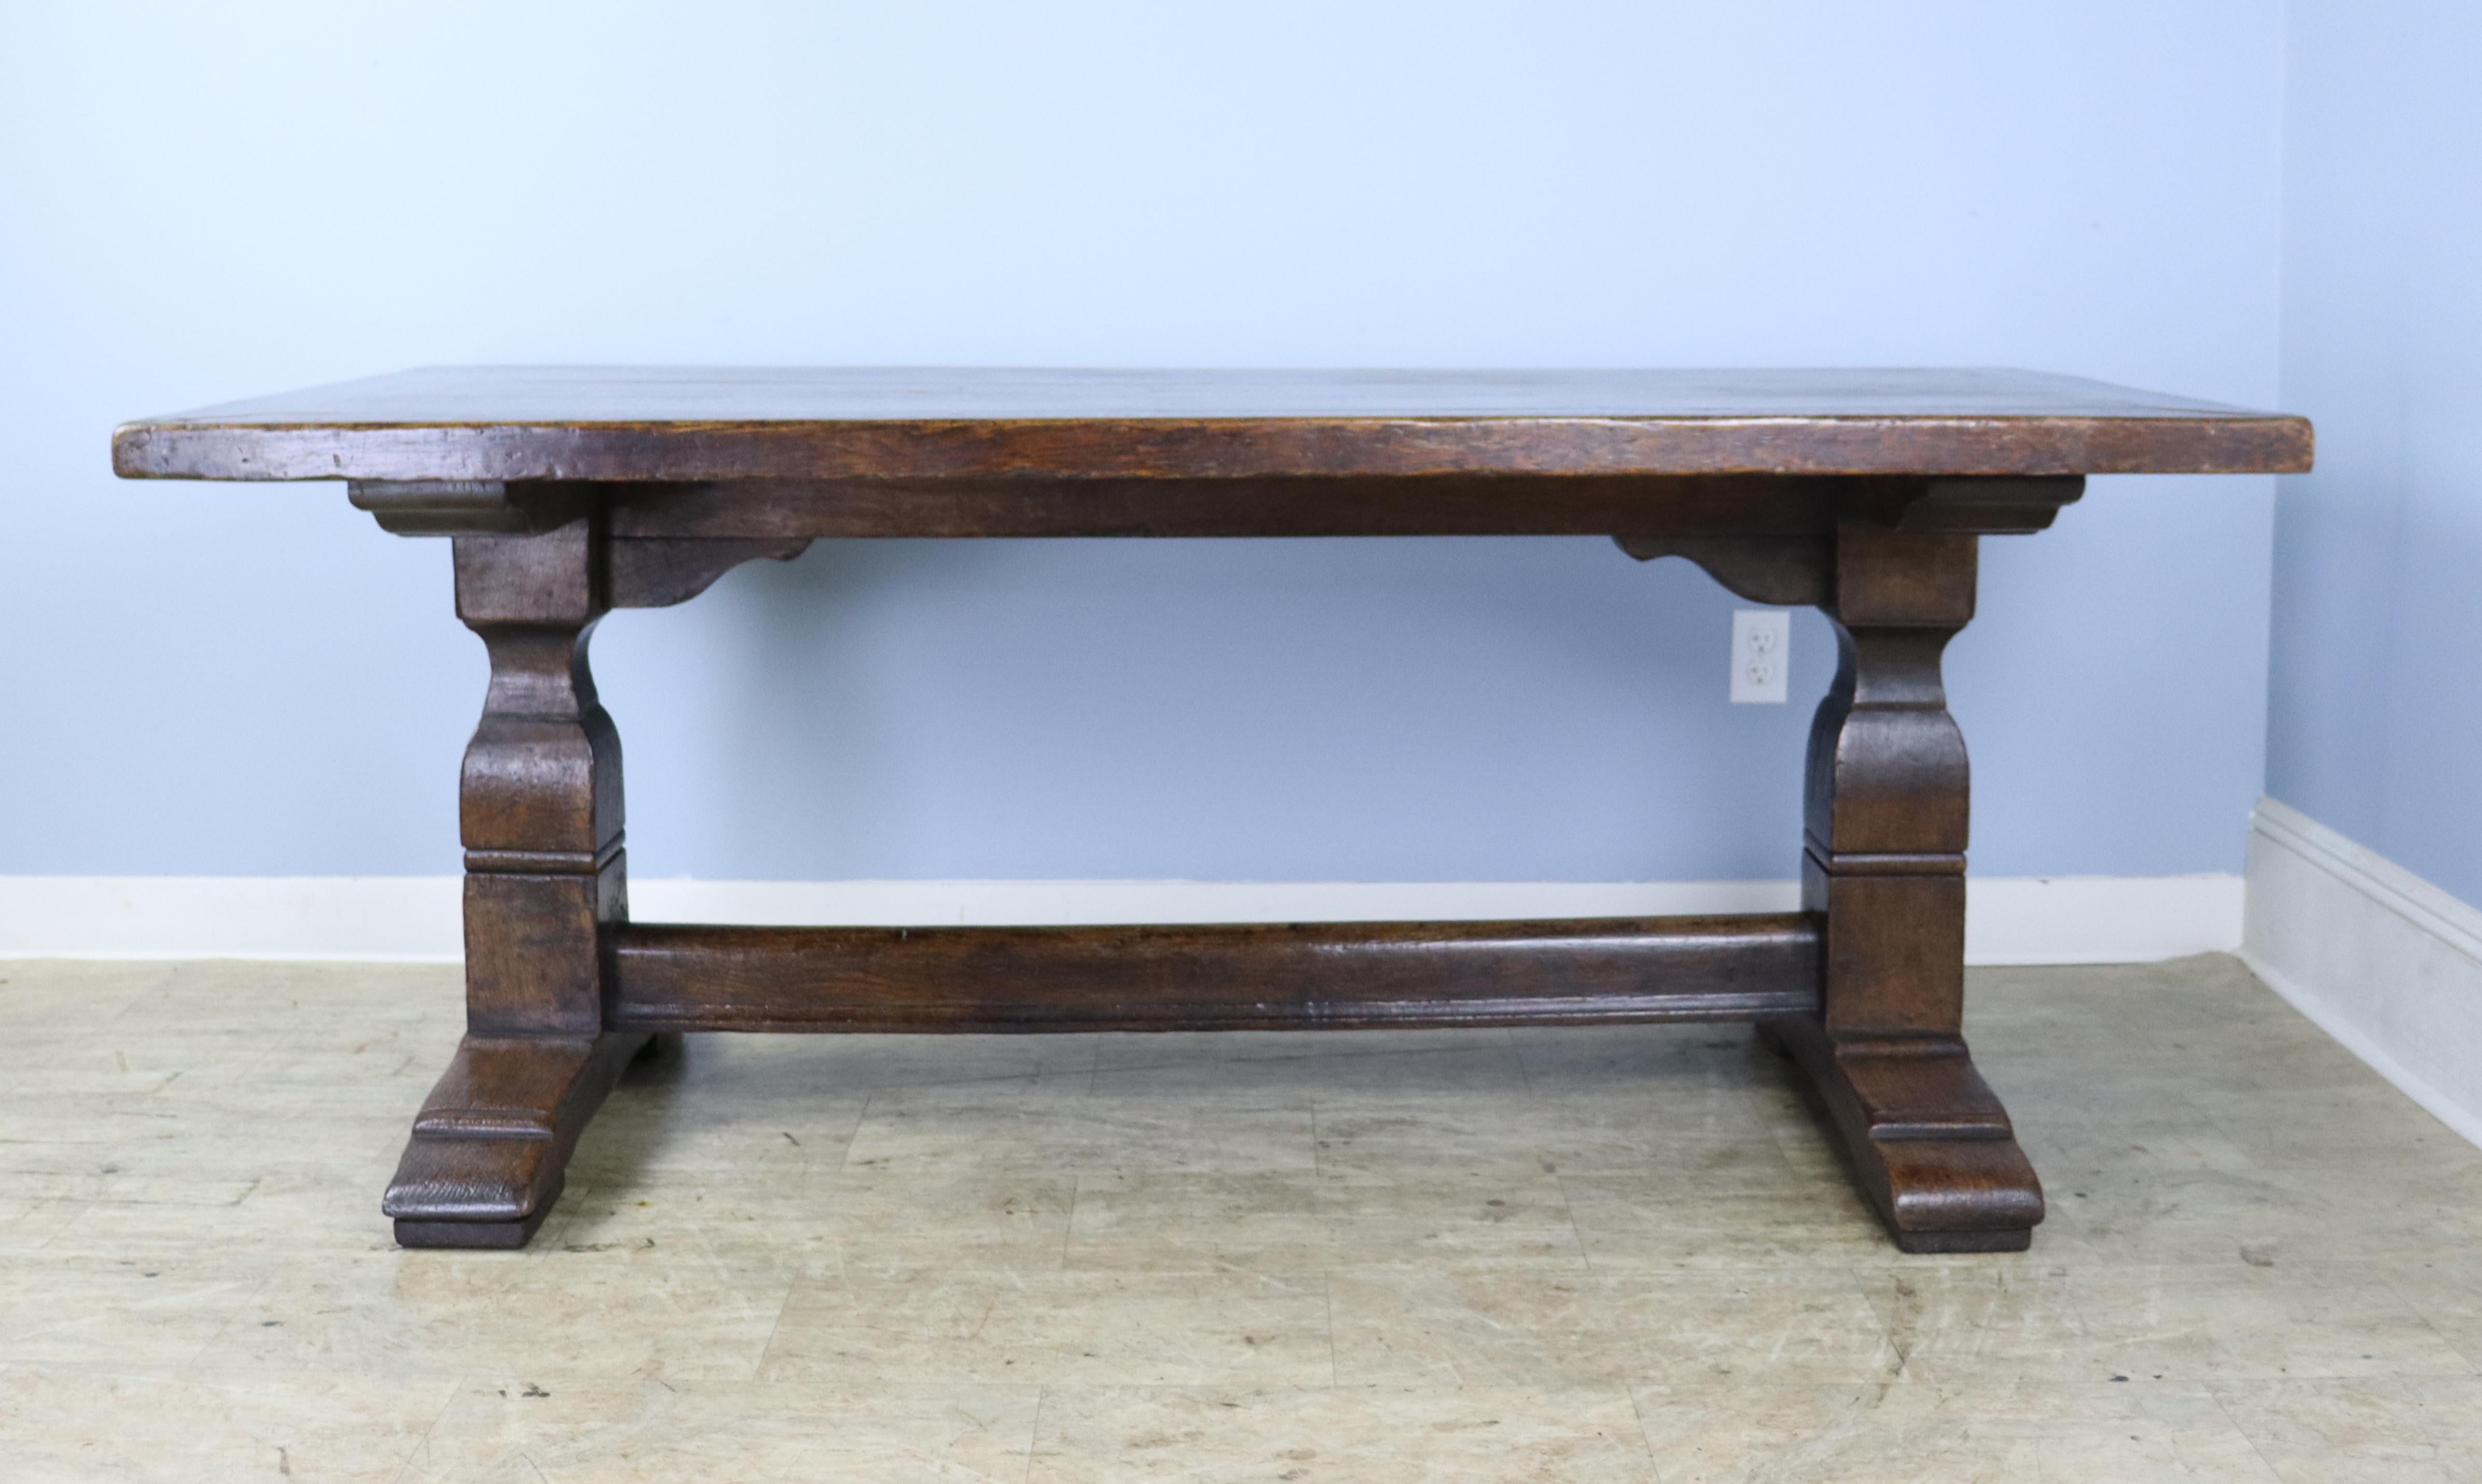 A grand oak trestle table, fashioned in the Victorian era of even older wood. Beautiful grain, color and patina on the top and good decorative base. The top is 2